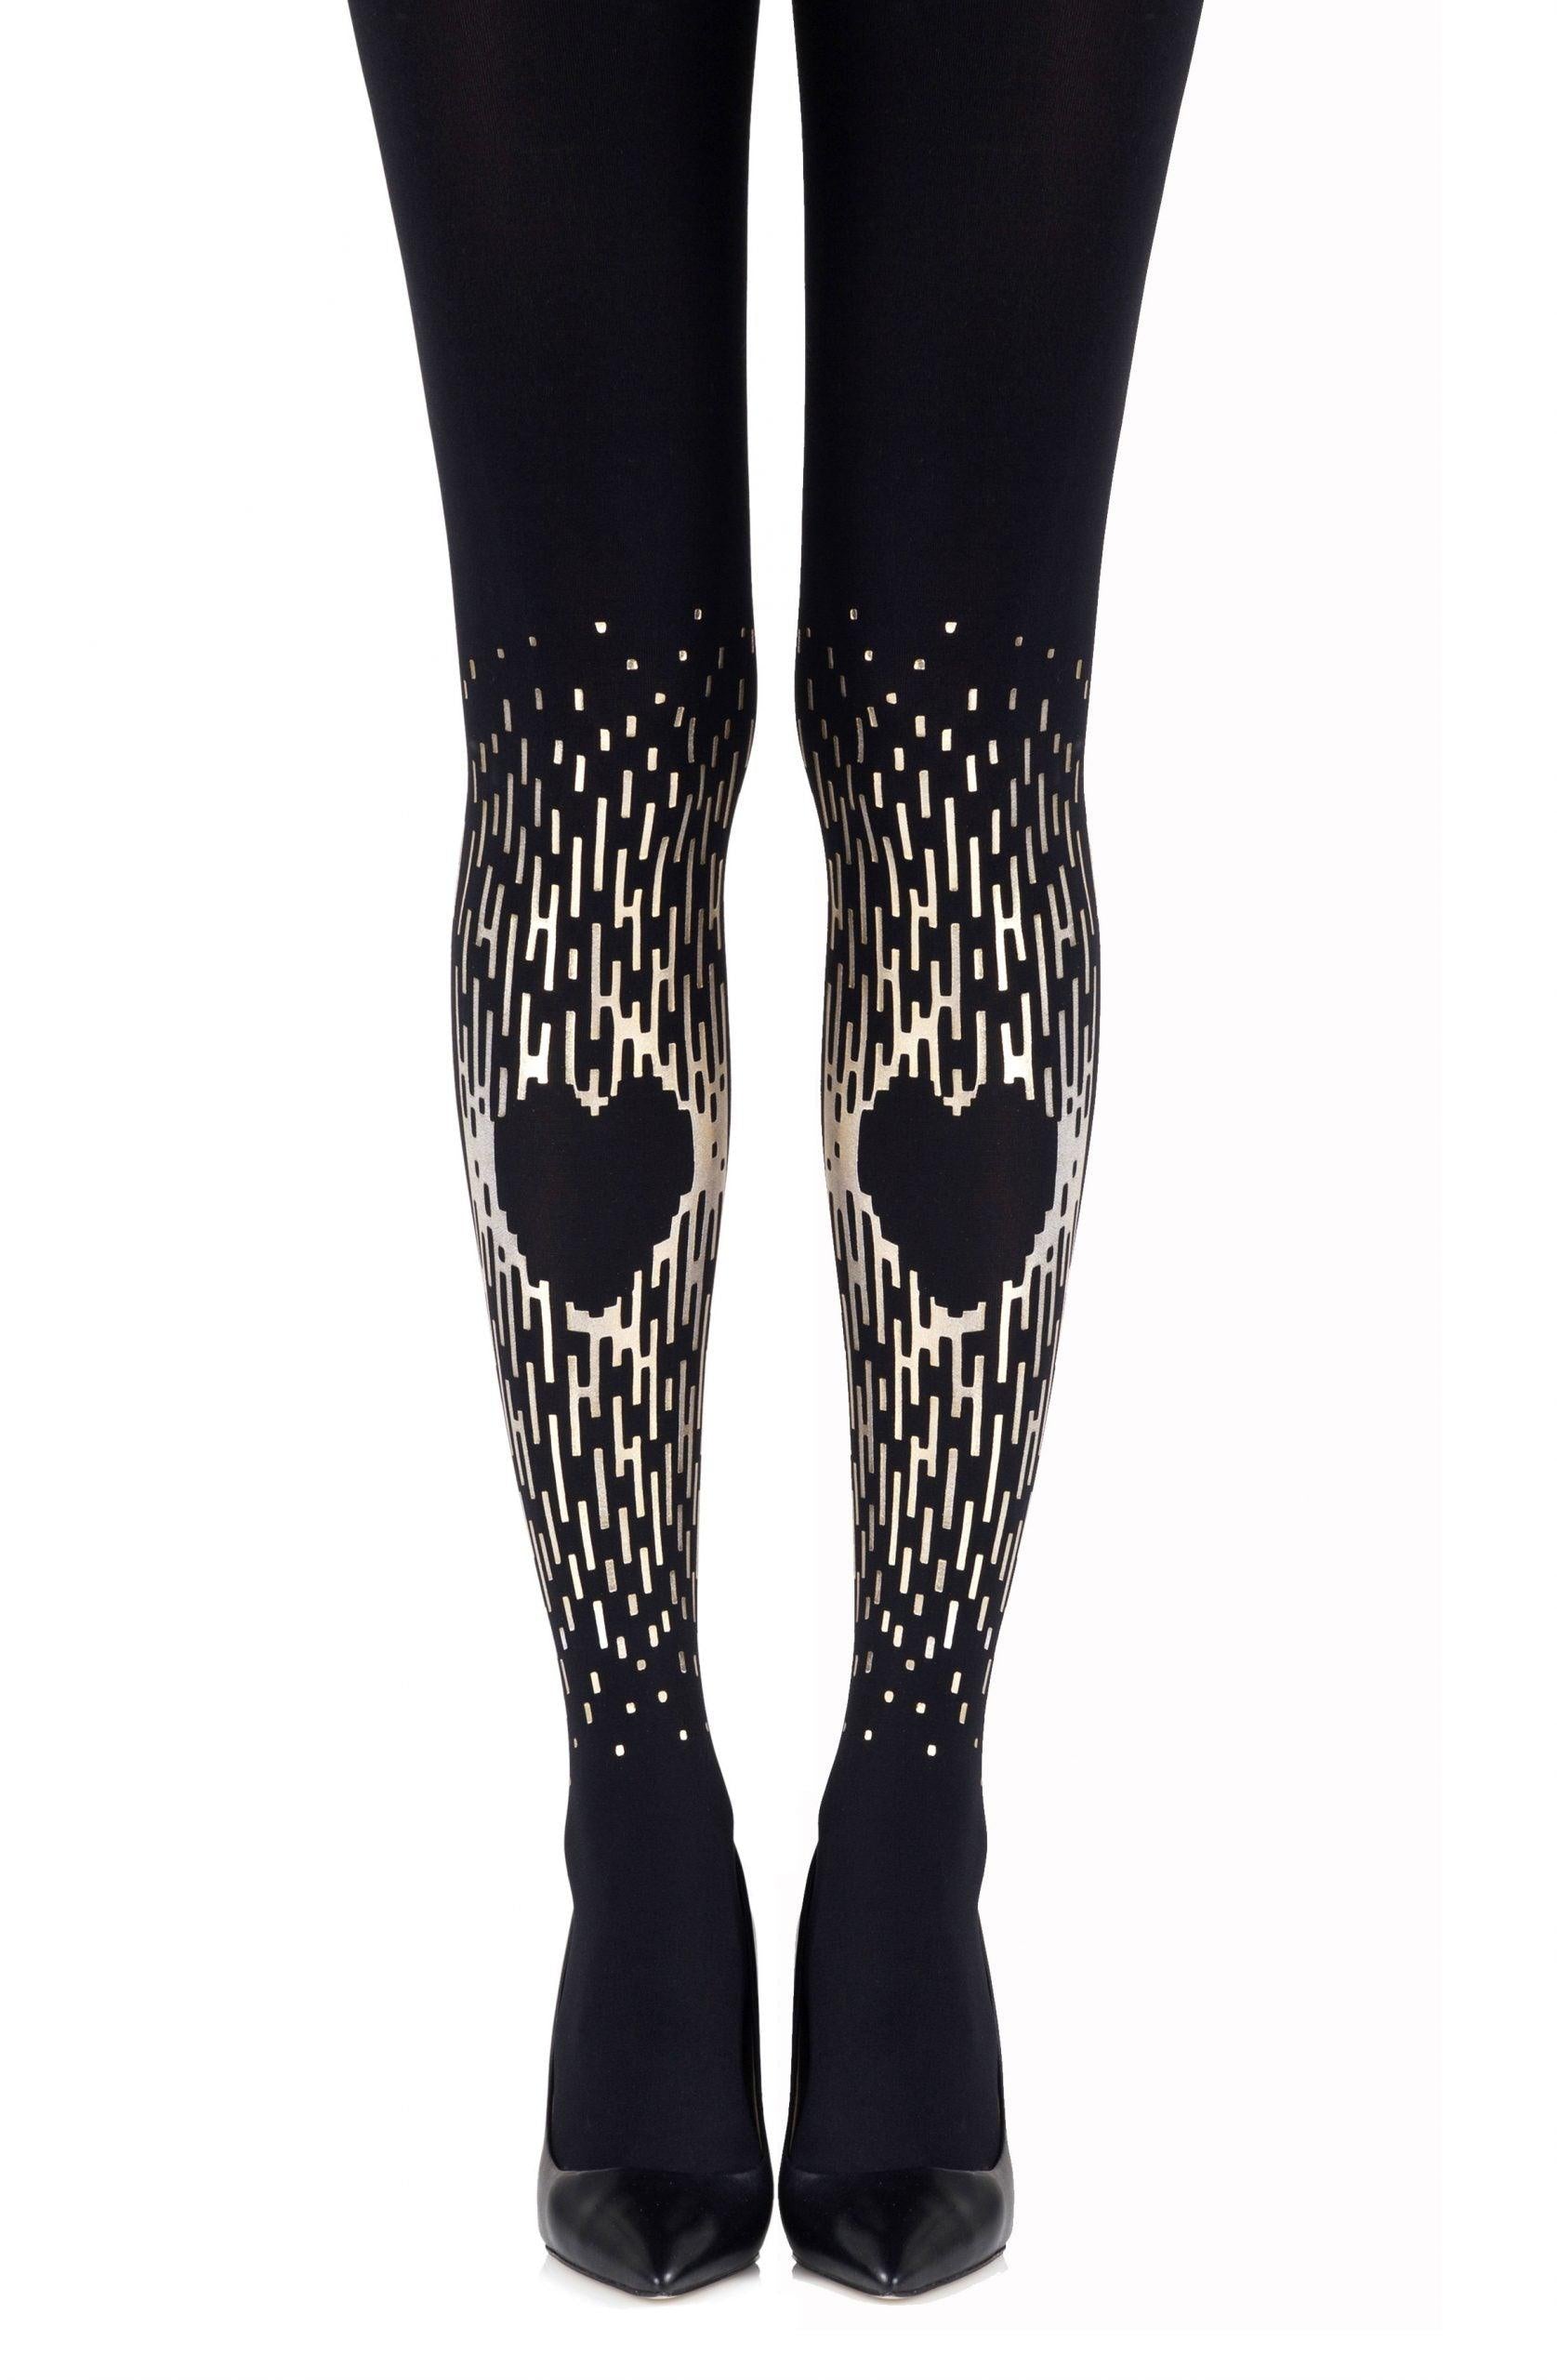 Zohara "Spread The Love" Gold Print Tights - Sydney Rose Lingerie 